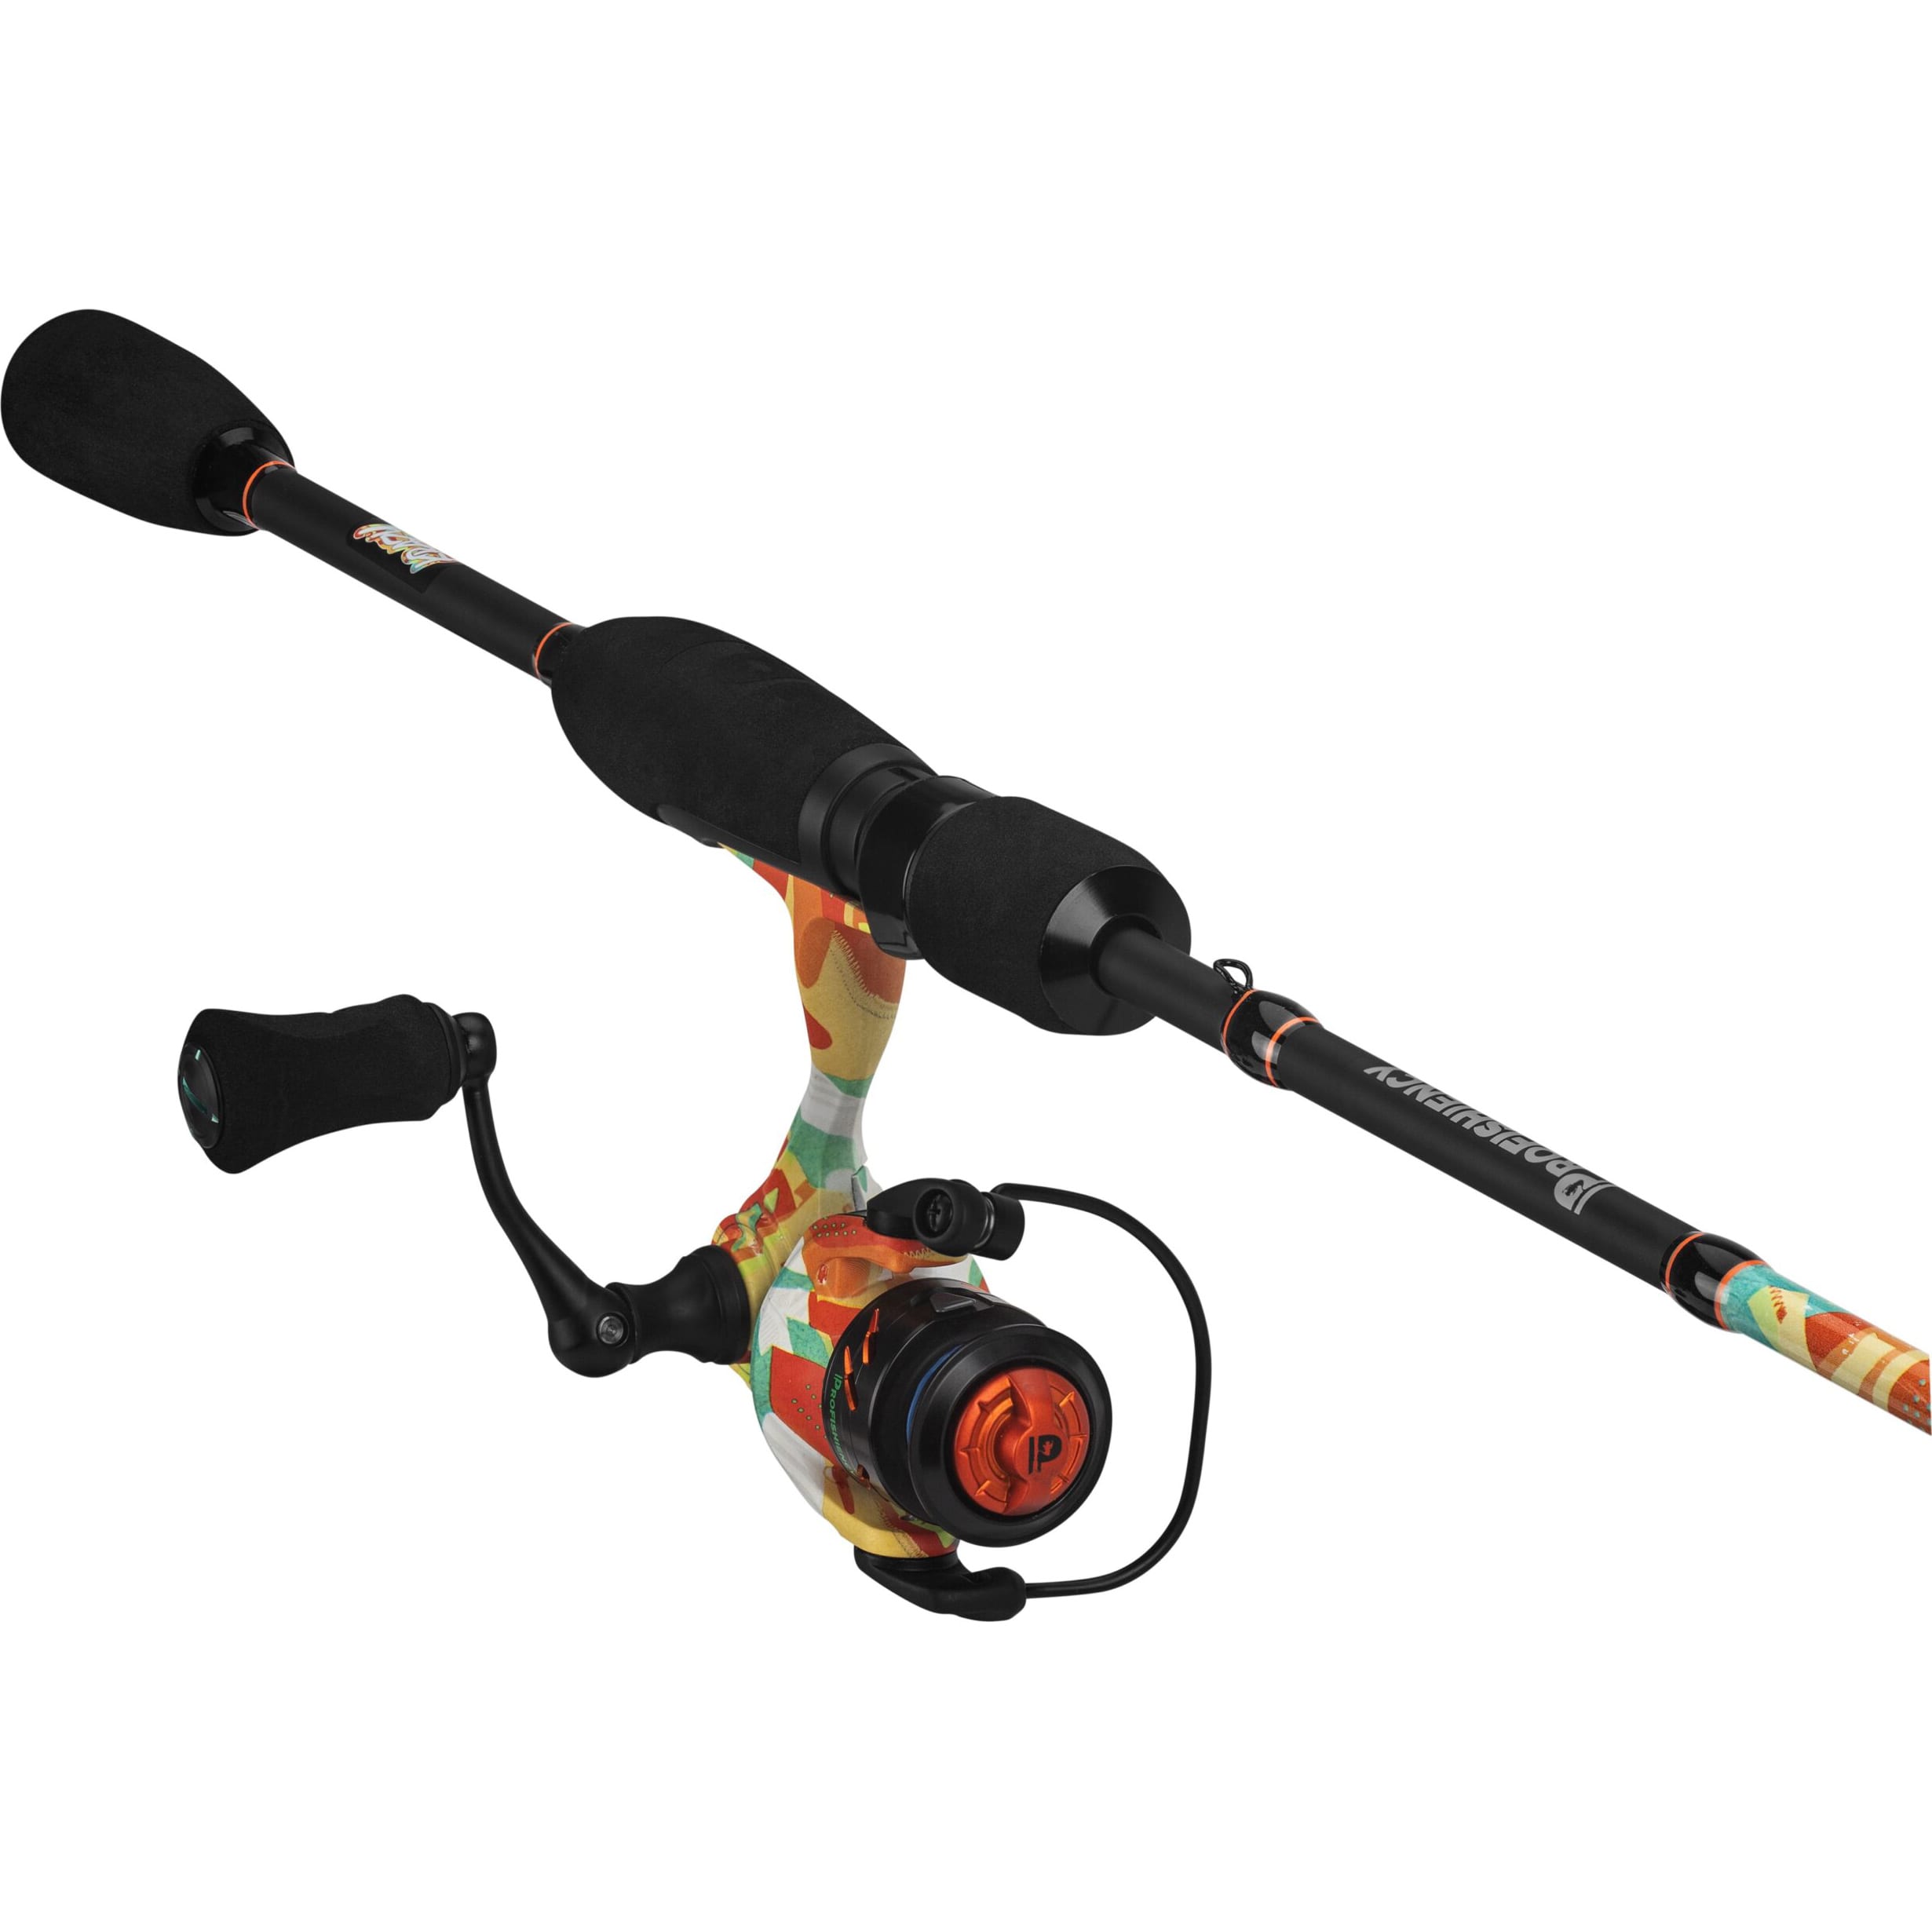 Pflüger All Freshwater Fishing Rod & Reel Combos for sale